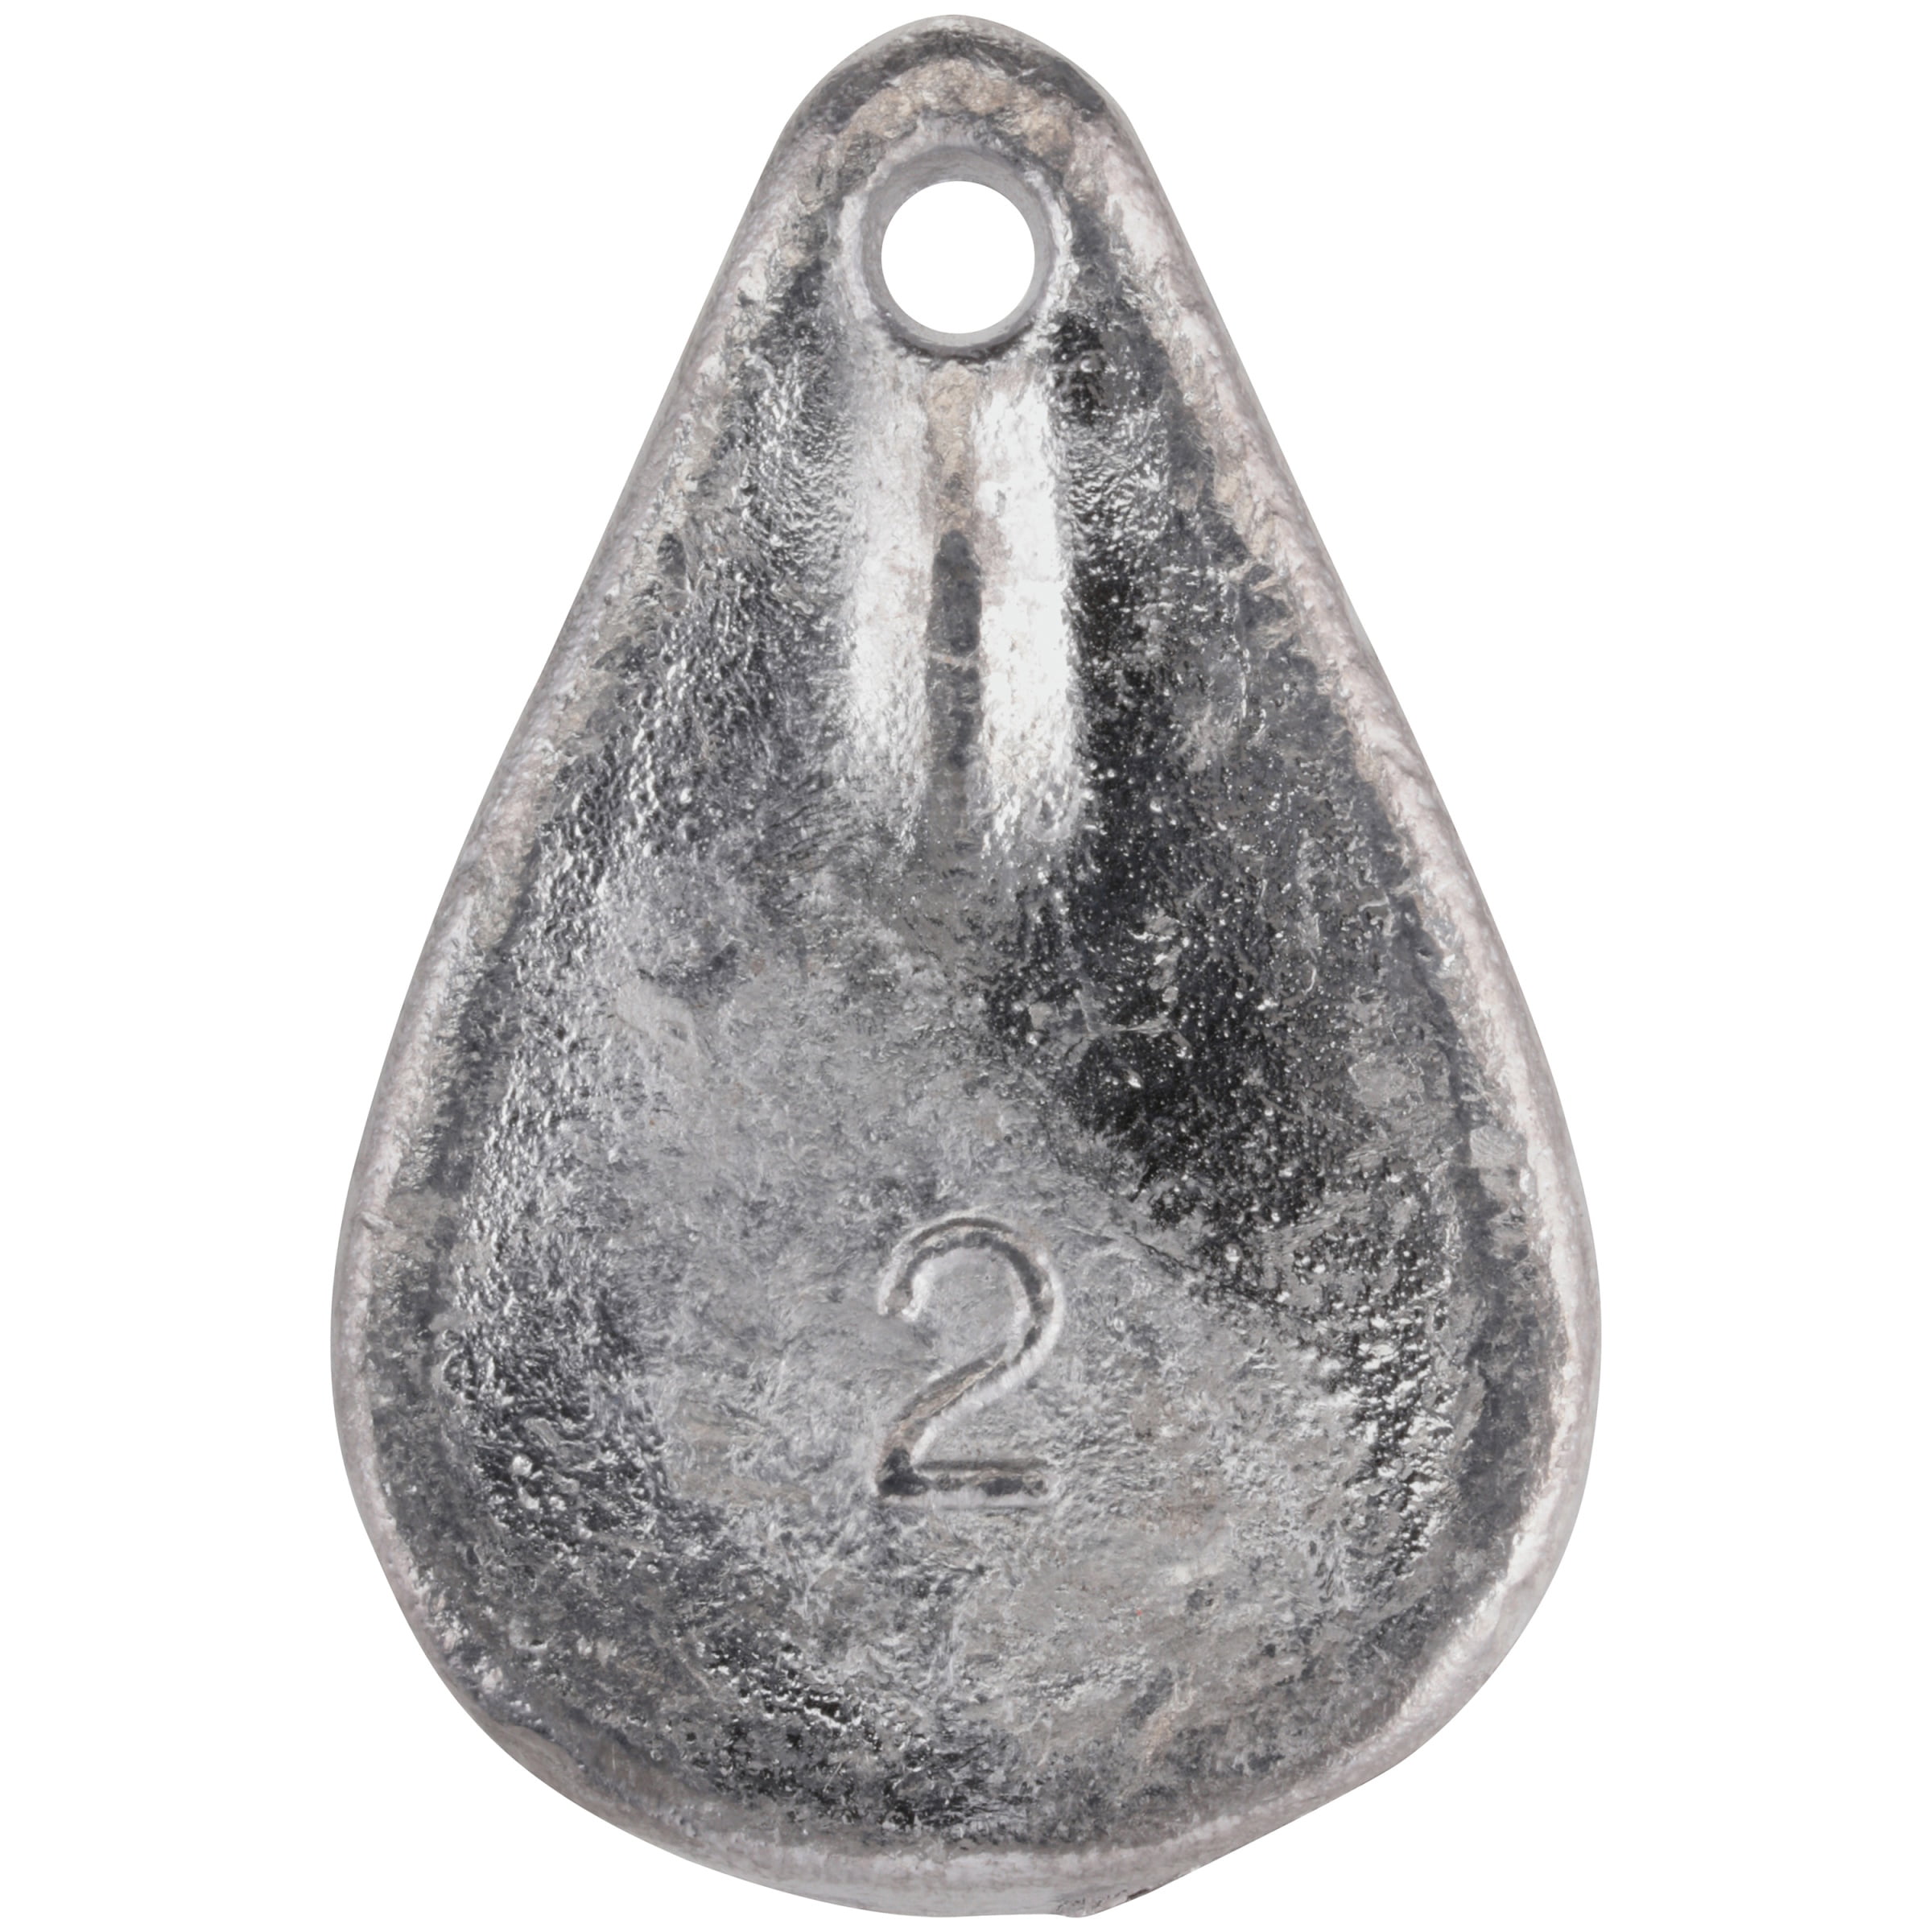 Bullet Weights® SS12-24 Lead Bass Casting Size 6, 1/2 oz Fishing Weights